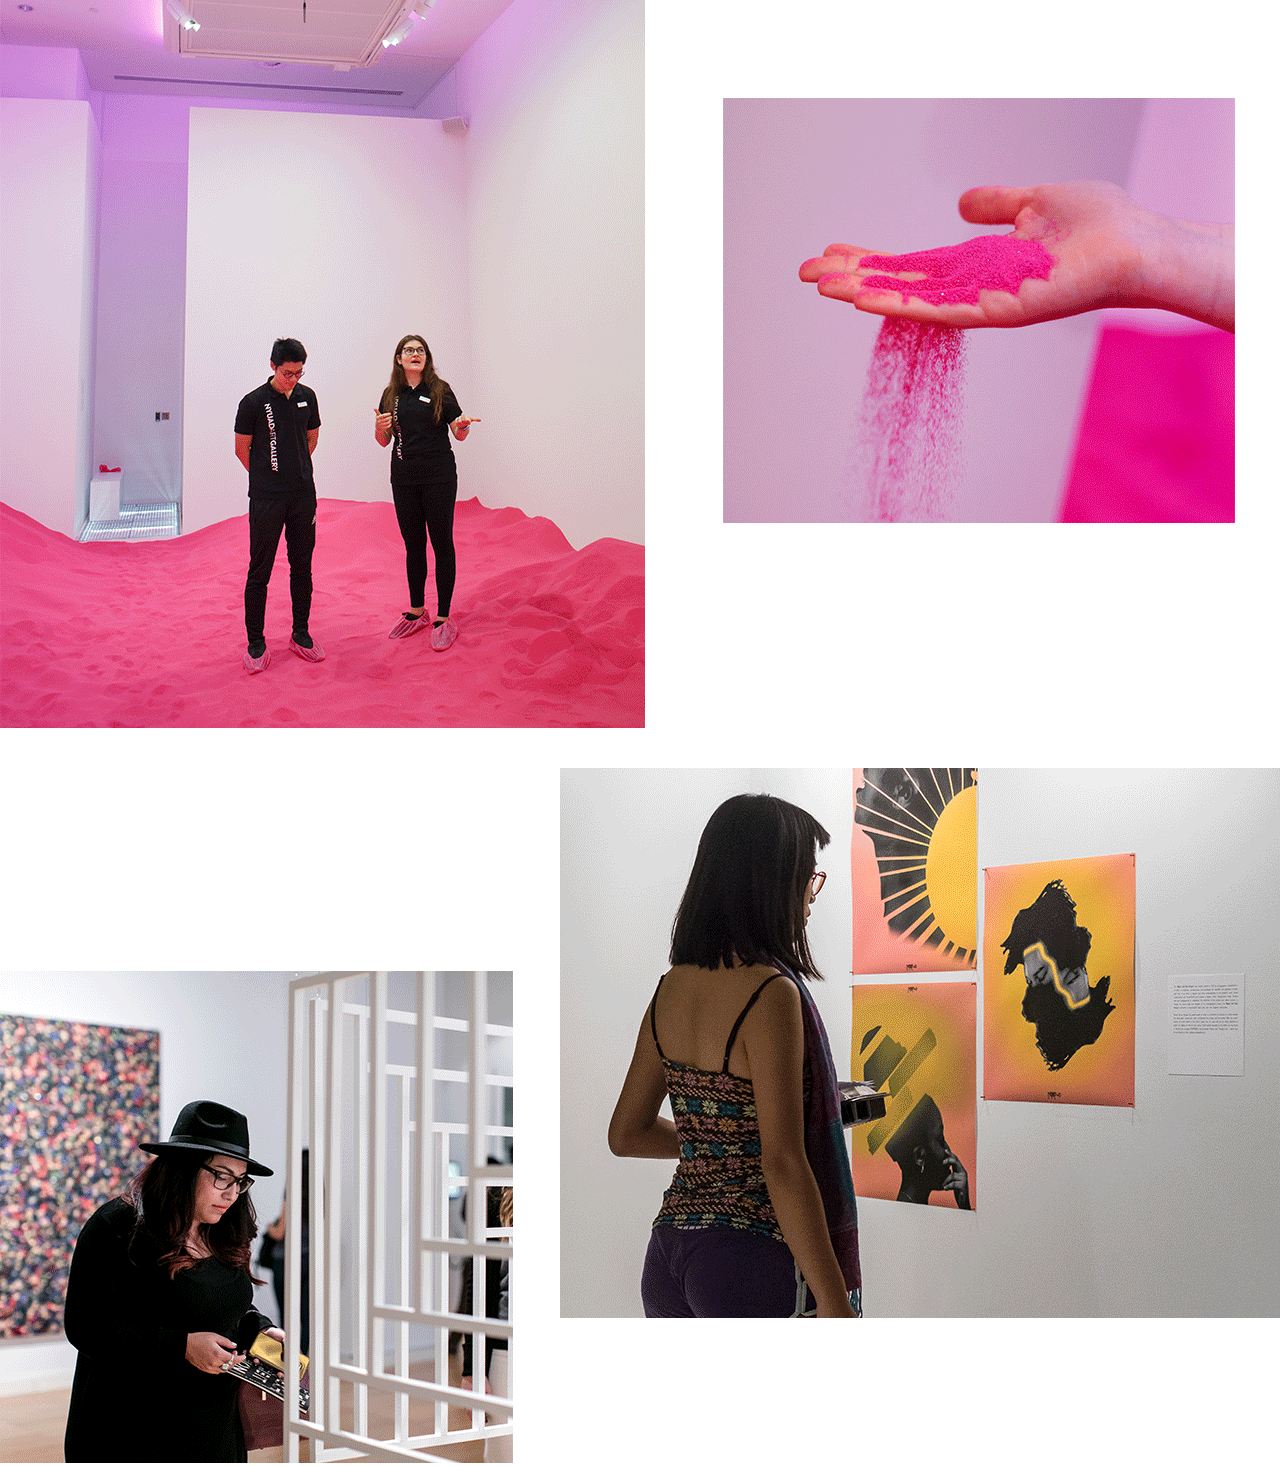 A collage of images from NYU galleries in Abu Dhabi (clockwise): 1) Two student workers showing off a gallery exhibit, they are standing in a room that is filled with pink sand. 2) A hand holding pink sand. 3) A student looking at an art installation. 4) A student with their back turned to the camera looking at artwork on the wall.